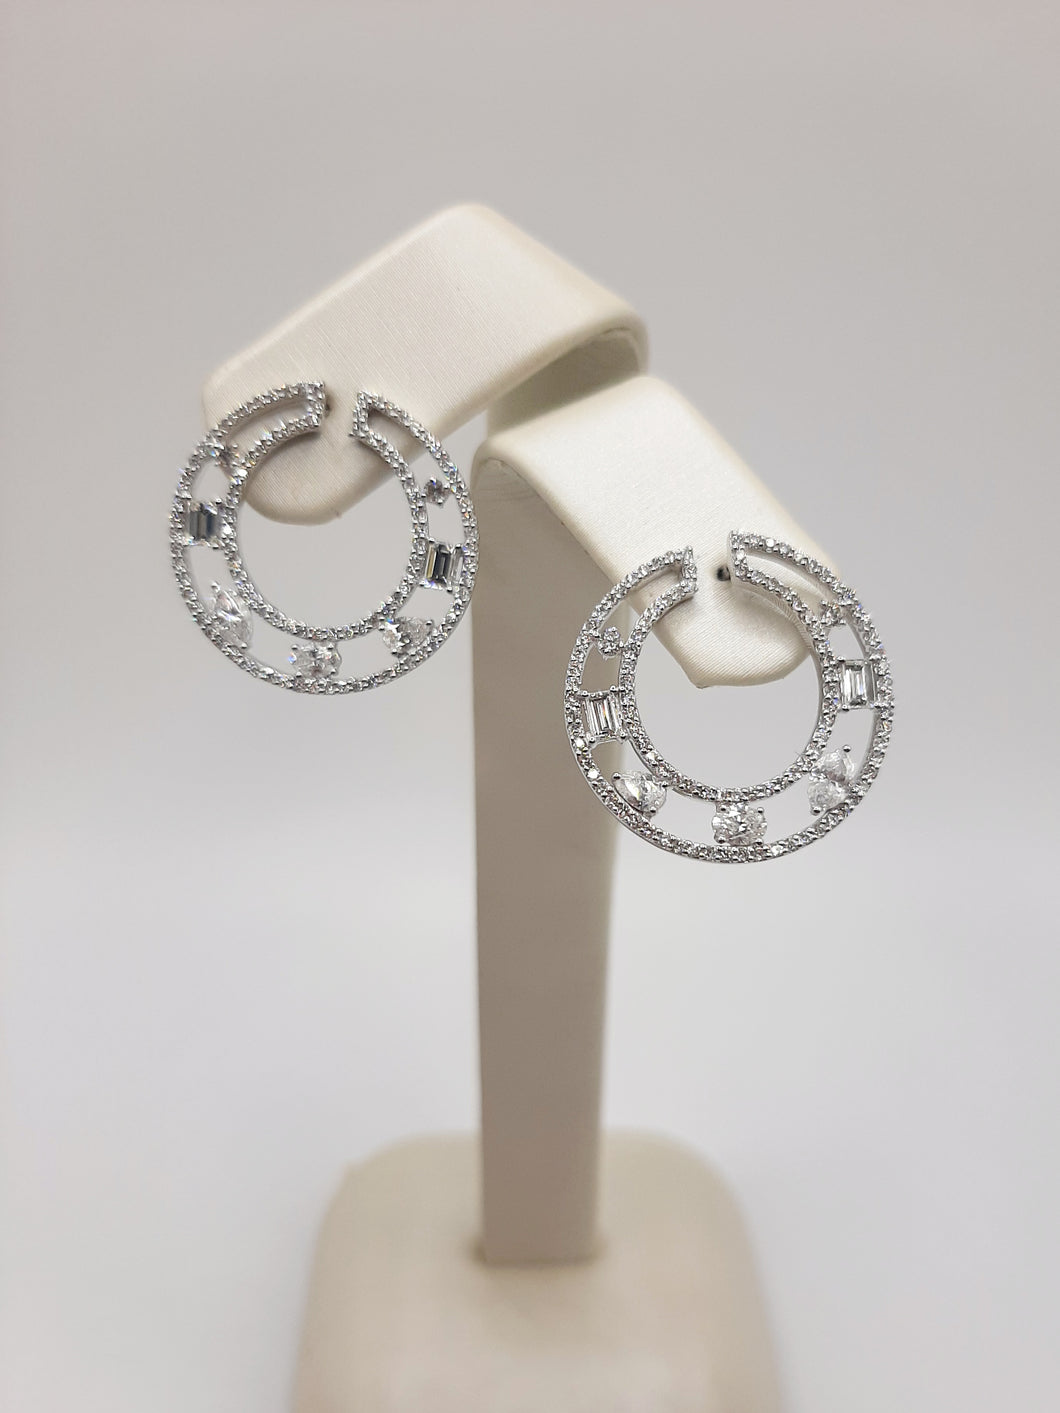 14kt white gold fashion circle earrings featuring post backs and 1.50 carats of natural diamonds